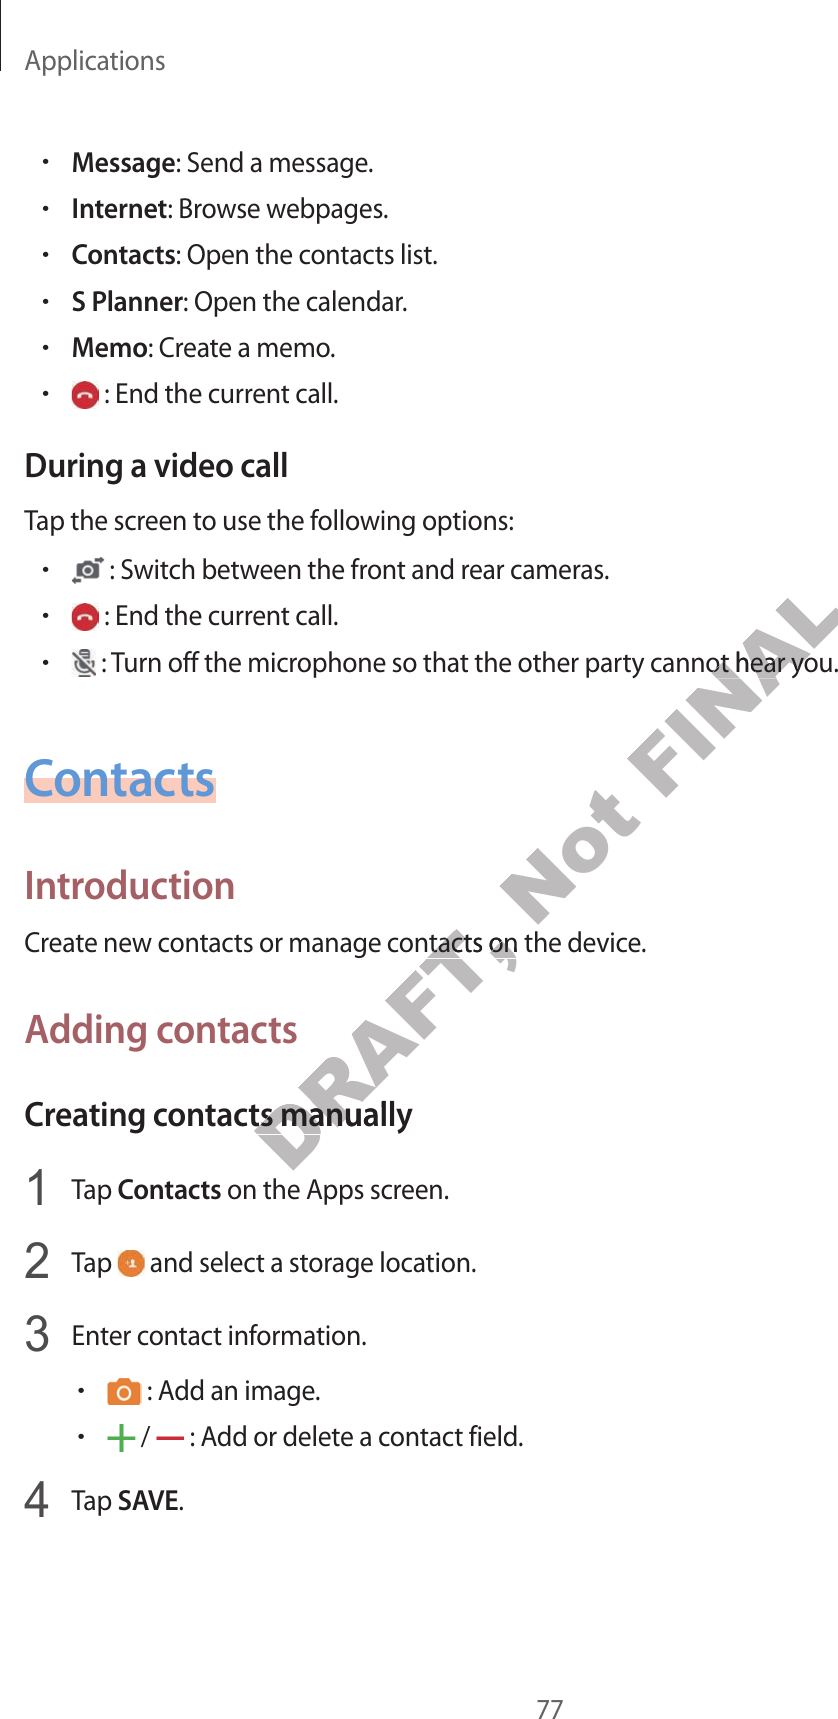 Applications77•Message: Send a message.•Internet: Brow se w ebpages .•Contacts: Open the contacts list.•S Planner: Open the calendar.•Memo: Creat e a memo.• : End the current call .During a video callTap the screen to use the f ollo wing options:• : Switch between the fr on t and r ear cameras .• : End the current call .• : Turn off the microphone so that the other party cannot hear you.ContactsIntroductionCreat e new c ontacts or manage contacts on the device.A dding con tactsCrea ting c ontacts manually1  Tap Contacts on the Apps screen.2  Tap   and select a storage location.3  Enter con tact information.• : Add an image .• /   : Add or delet e a con tact field.4  Tap SAVE.DRAFT, Creat e new c ontacts or manage contacts on the device.DRAFT, Creat e new c ontacts or manage contacts on the device.Crea ting c ontacts manuallyDRAFT, Crea ting c ontacts manually on the Apps screen.DRAFT,  on the Apps screen.Not FINAL : Turn off the microphone so that the other party cannot hear you.FINAL : Turn off the microphone so that the other party cannot hear you.